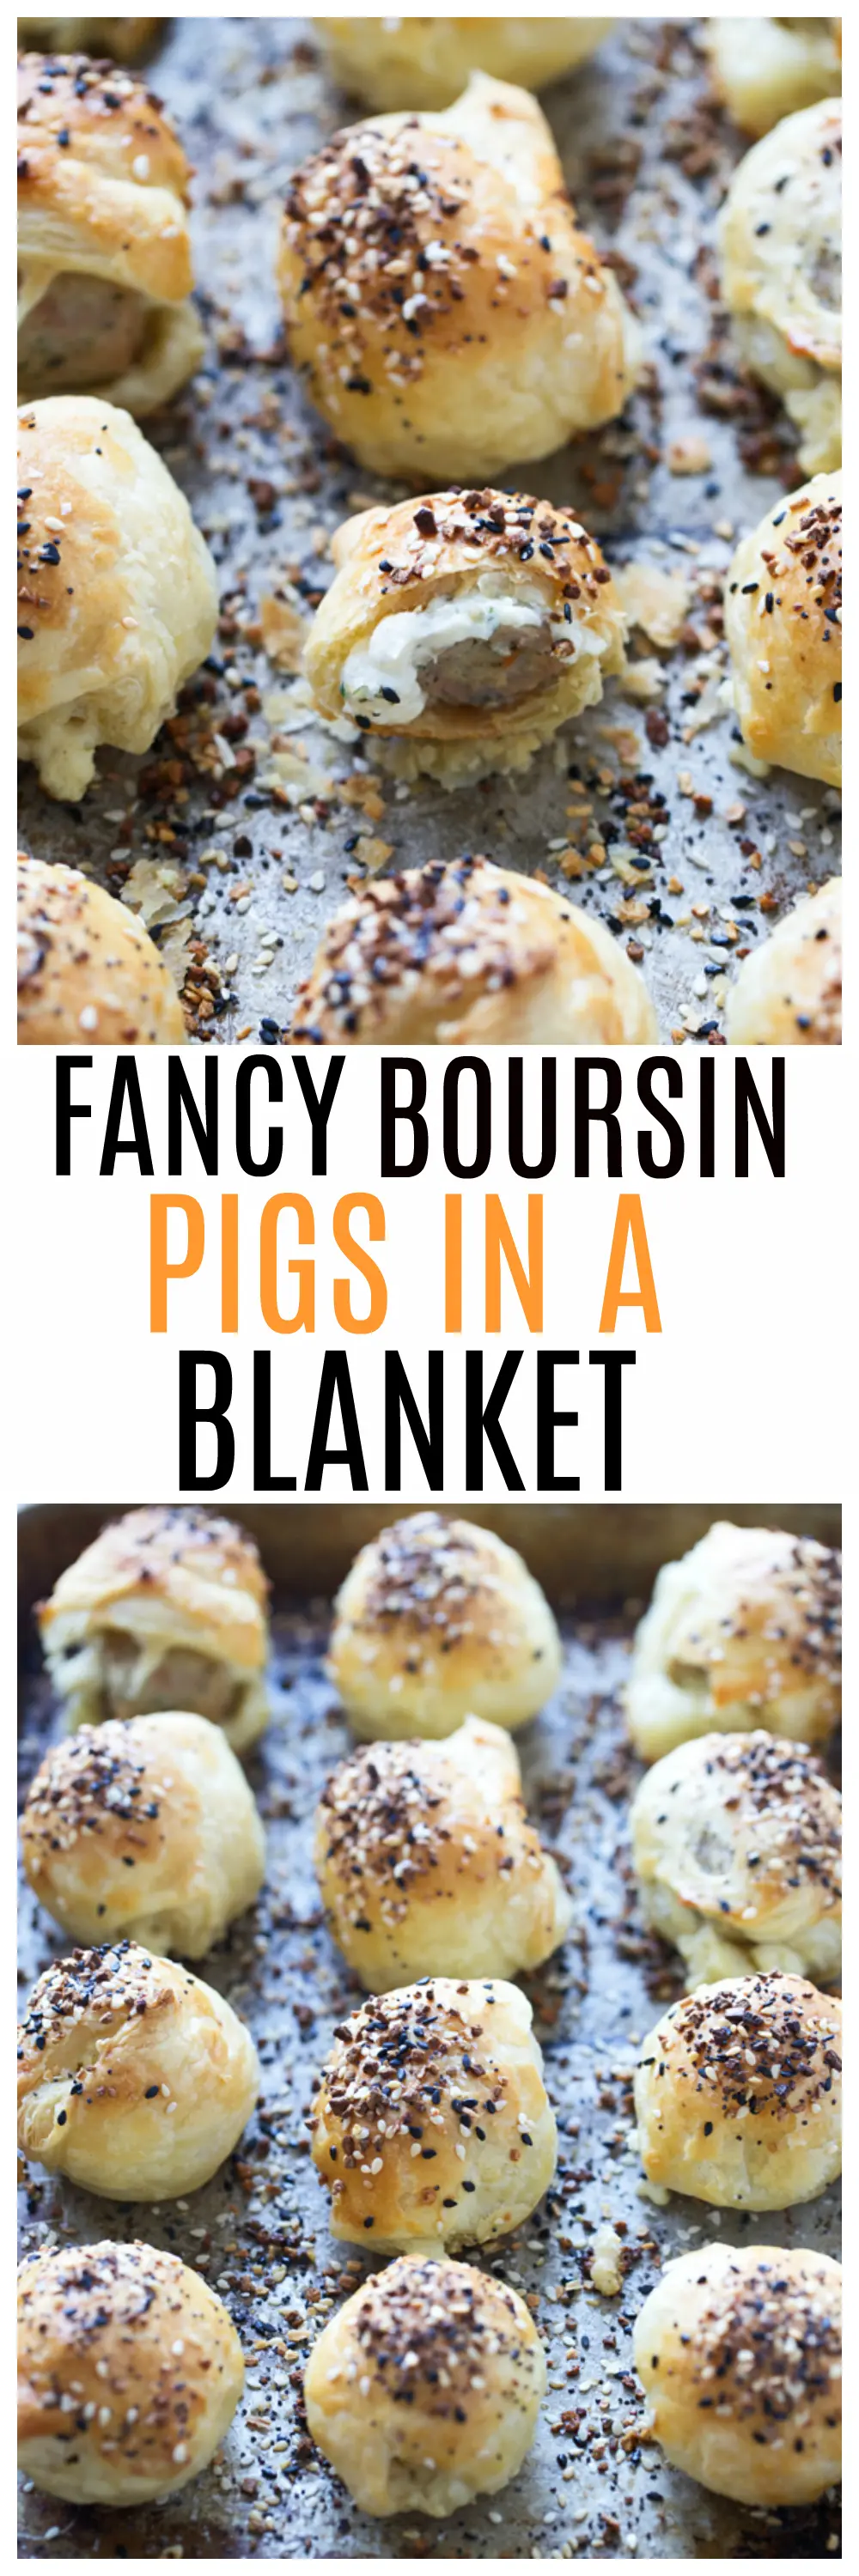 Fancy Boursin Pigs in a Blanket- Only five ingredients and so easy to throw together!